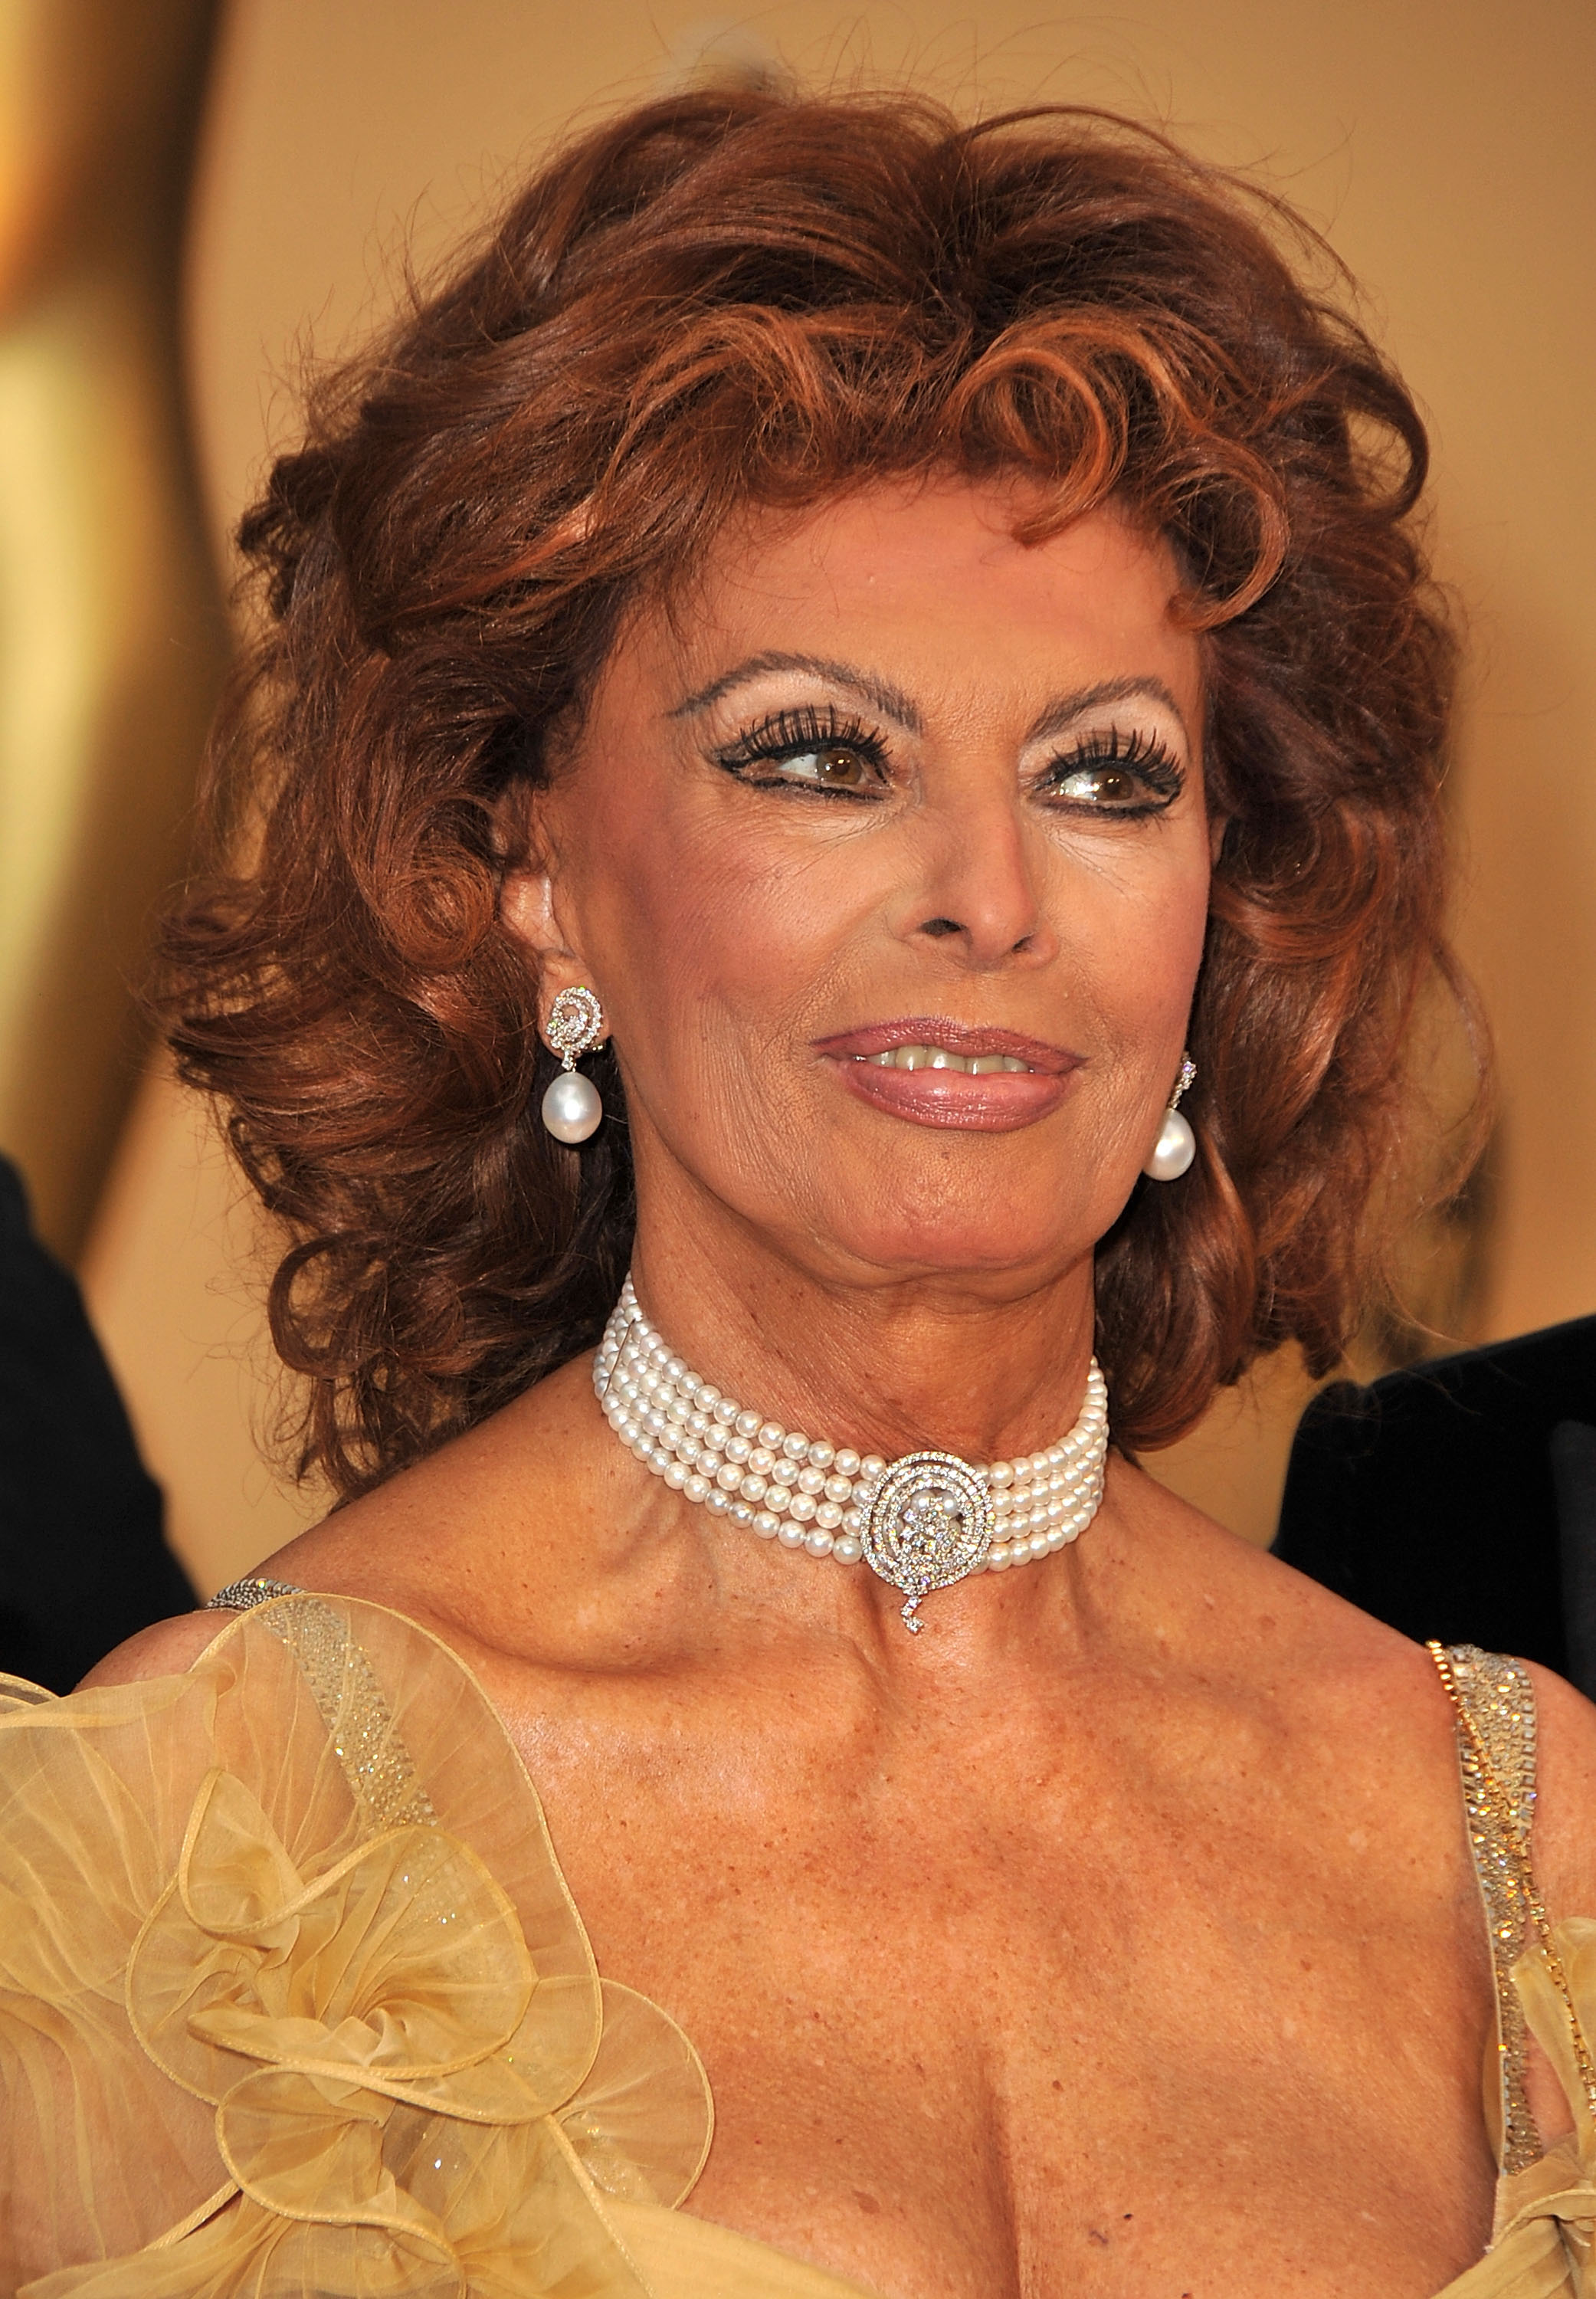 Sophia Loren at the 81st Annual Academy Awards in Hollywood, California on February 22, 2009 | Source: Getty Images